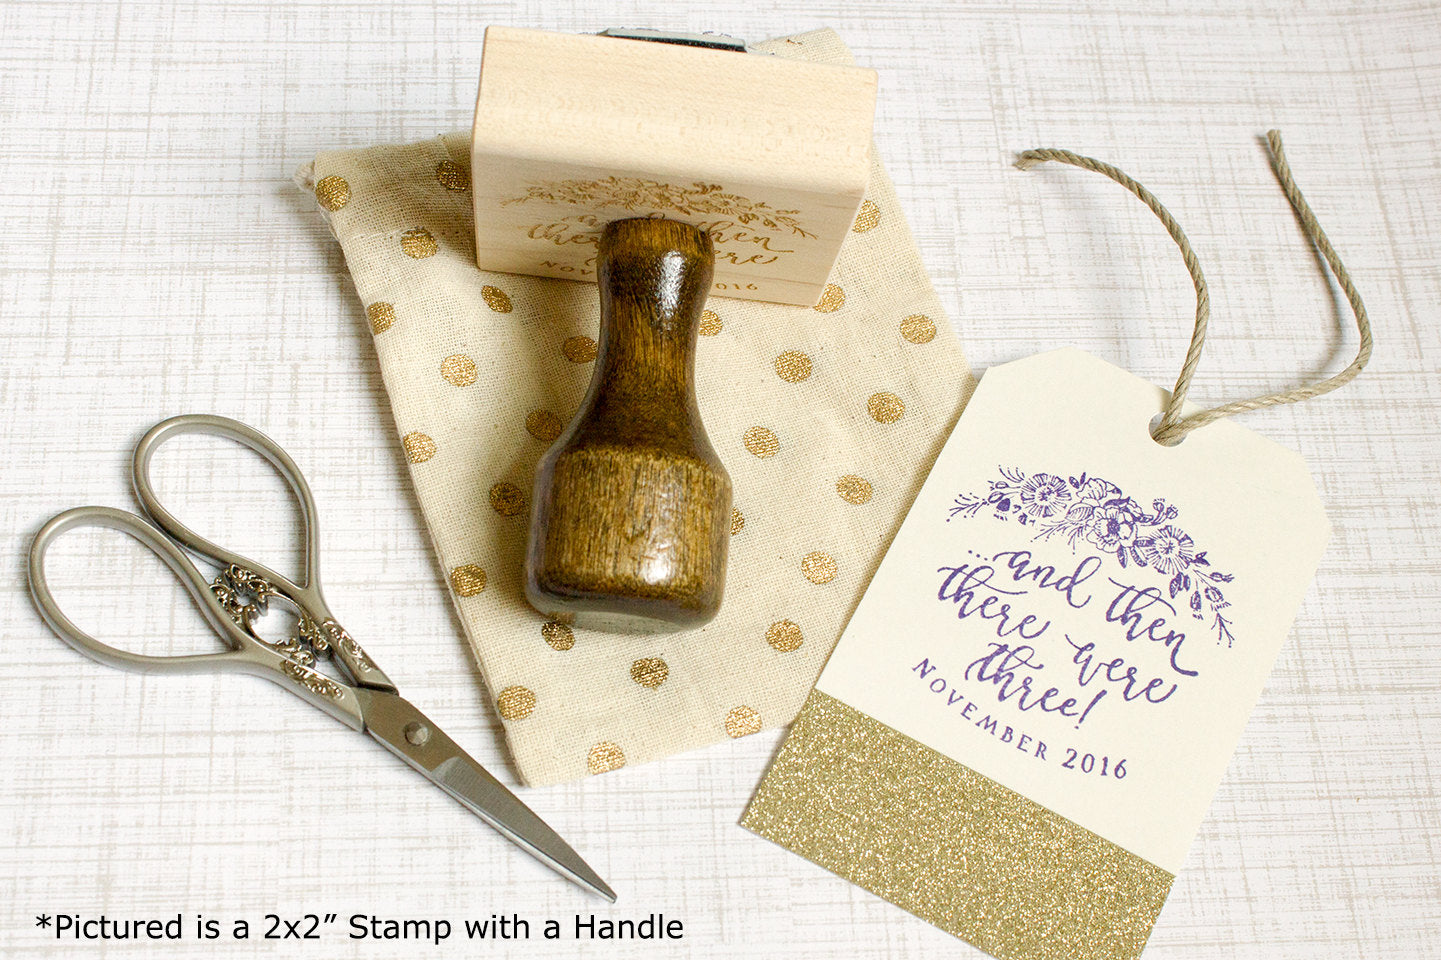 Wedding Rubber Stamp for Wedding Favors, Napkins, Cards. Custom Rubber Stamp, DIY Wedding Stamp, Monogram. Custom Stamp 2 to 3 Inch - W40